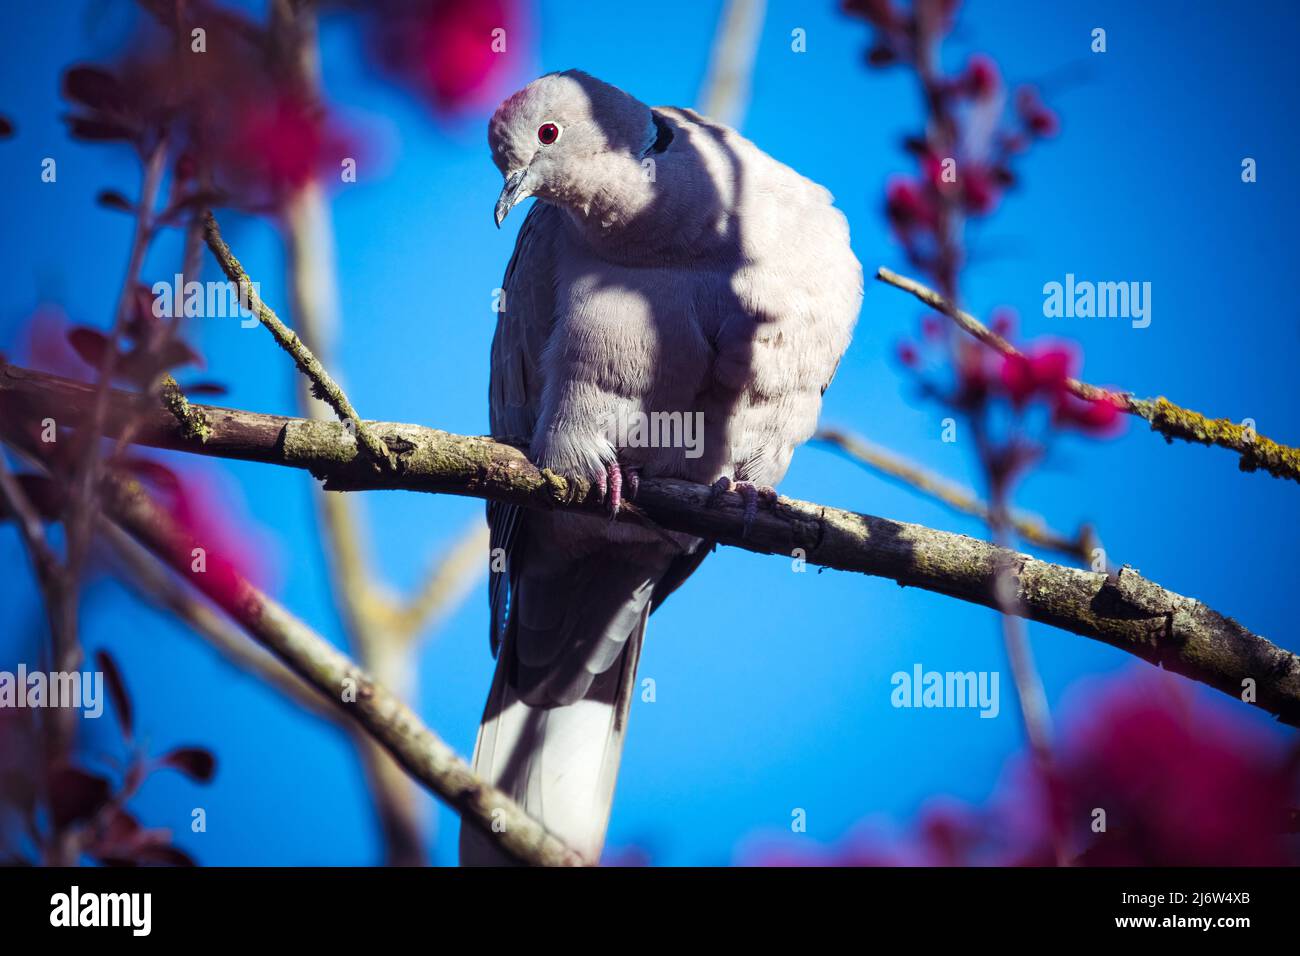 Collared dove perched in sunshine against blue sky Stock Photo